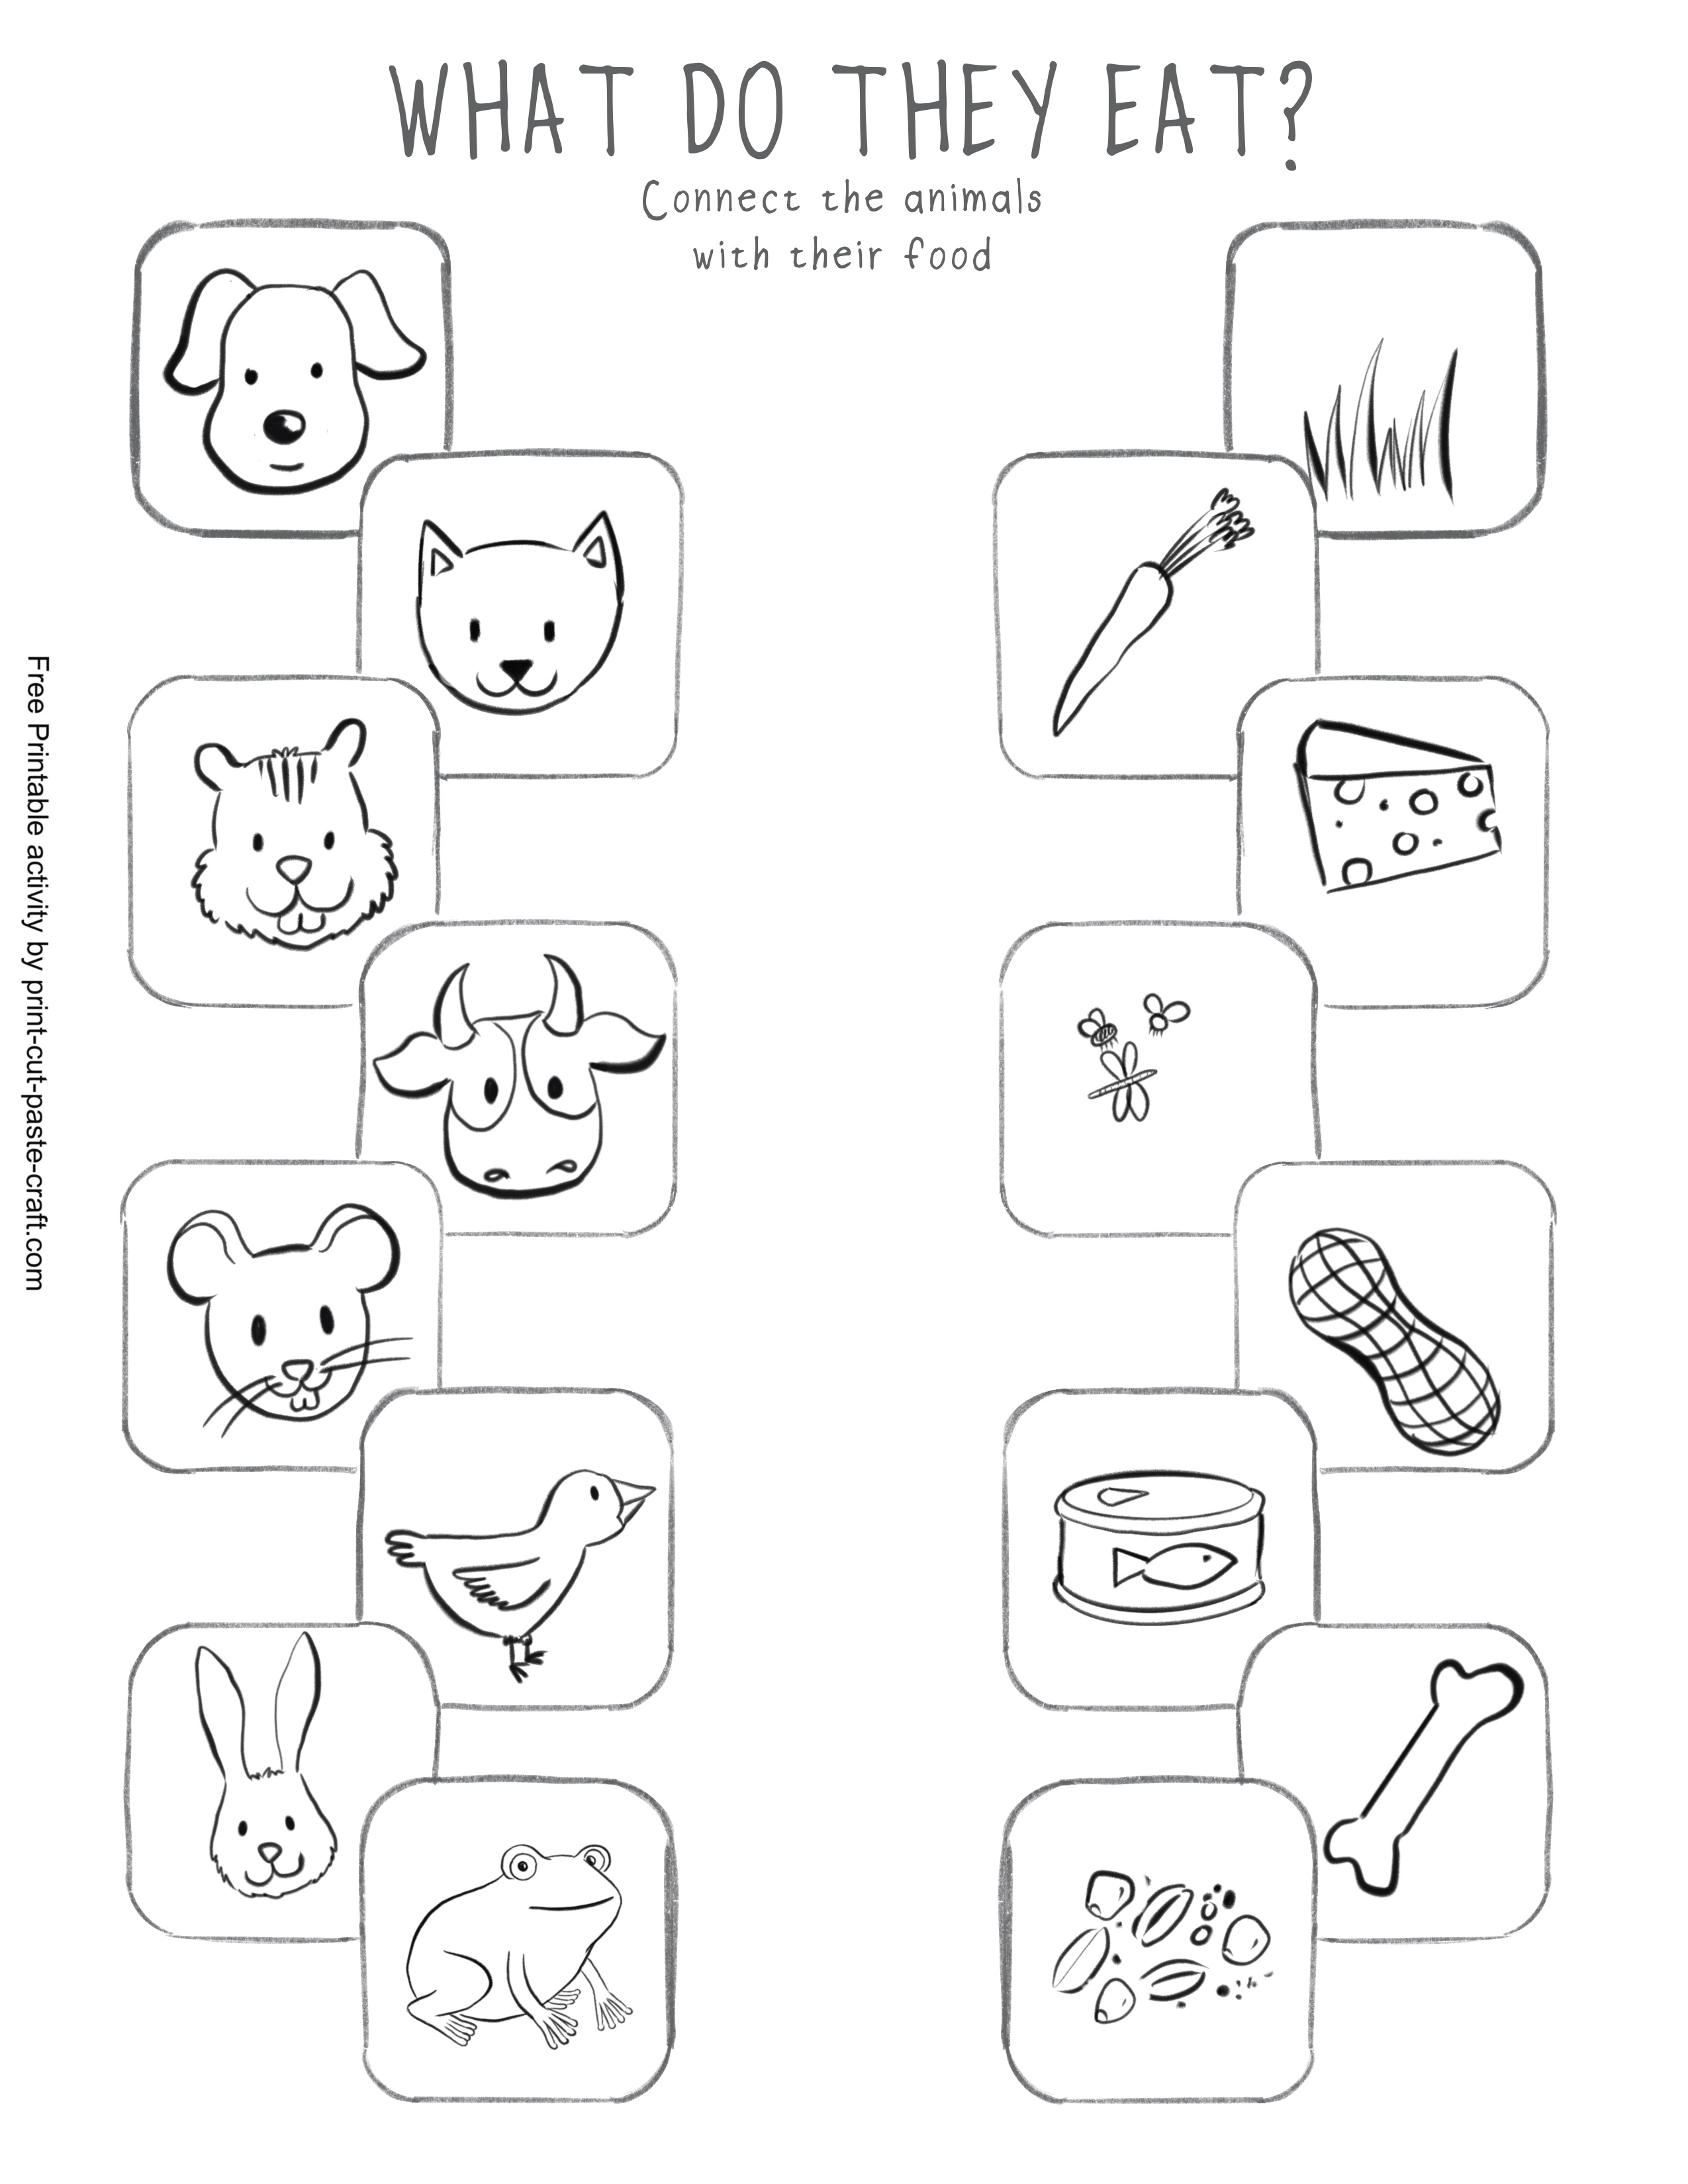 Animal food activity free printable activity by print-cut-paste-craft.com